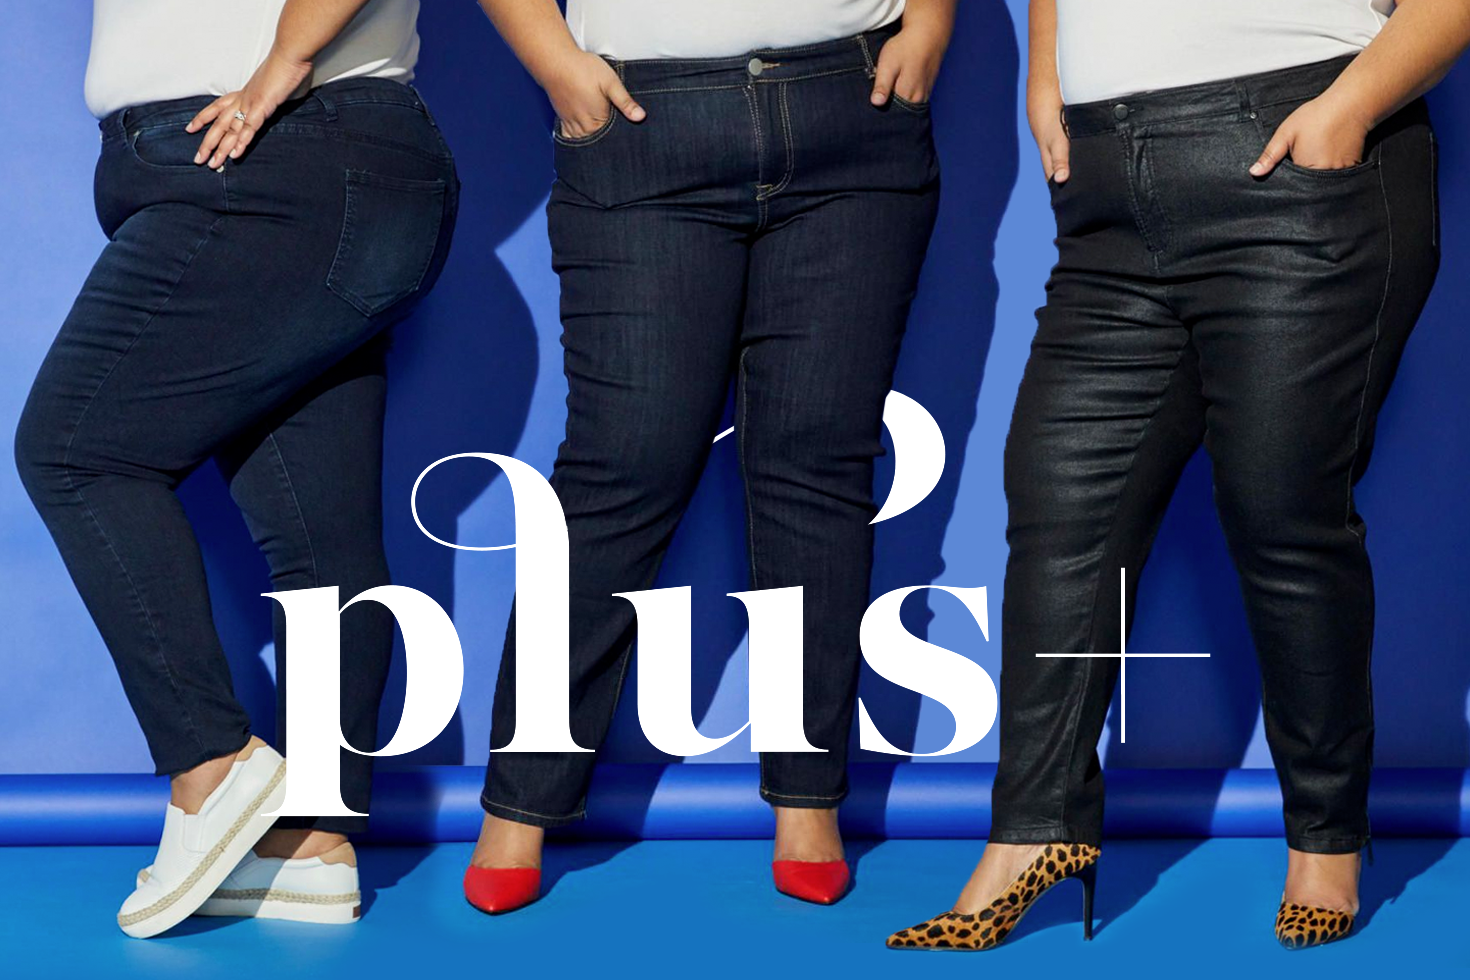 inexpensive plus size jeans